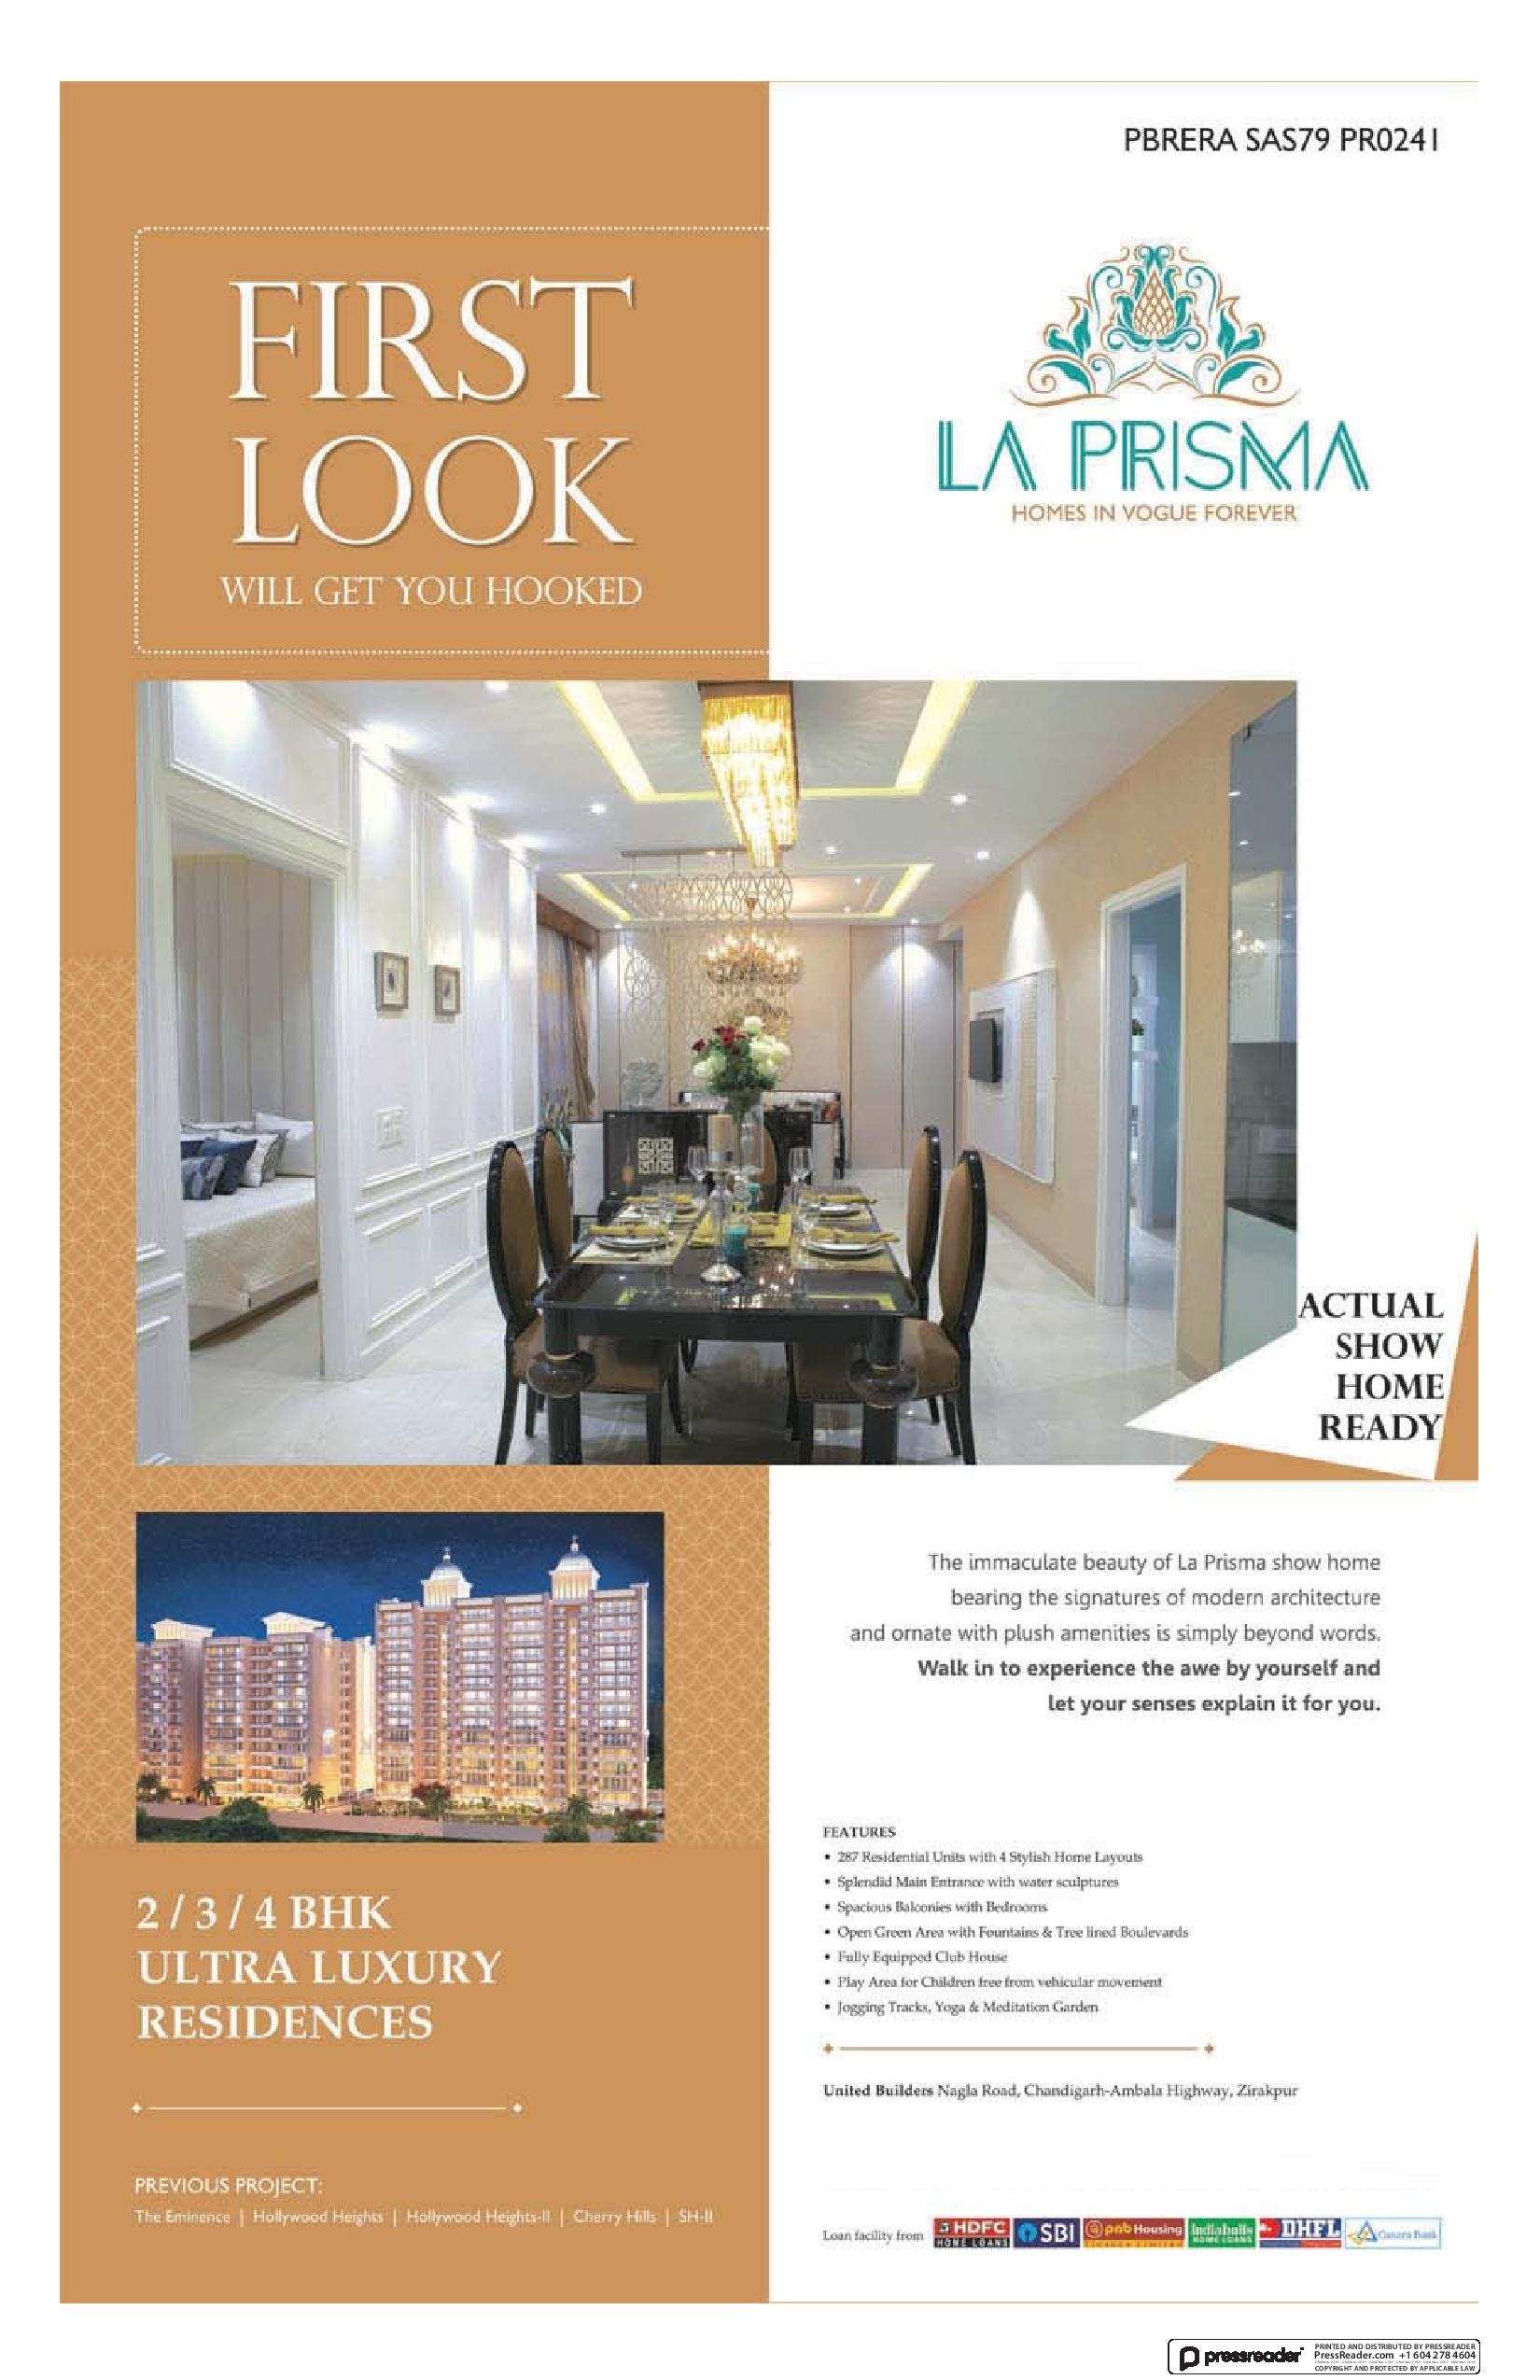 Actual show home ready at United La Prisma in Chandigarh Update